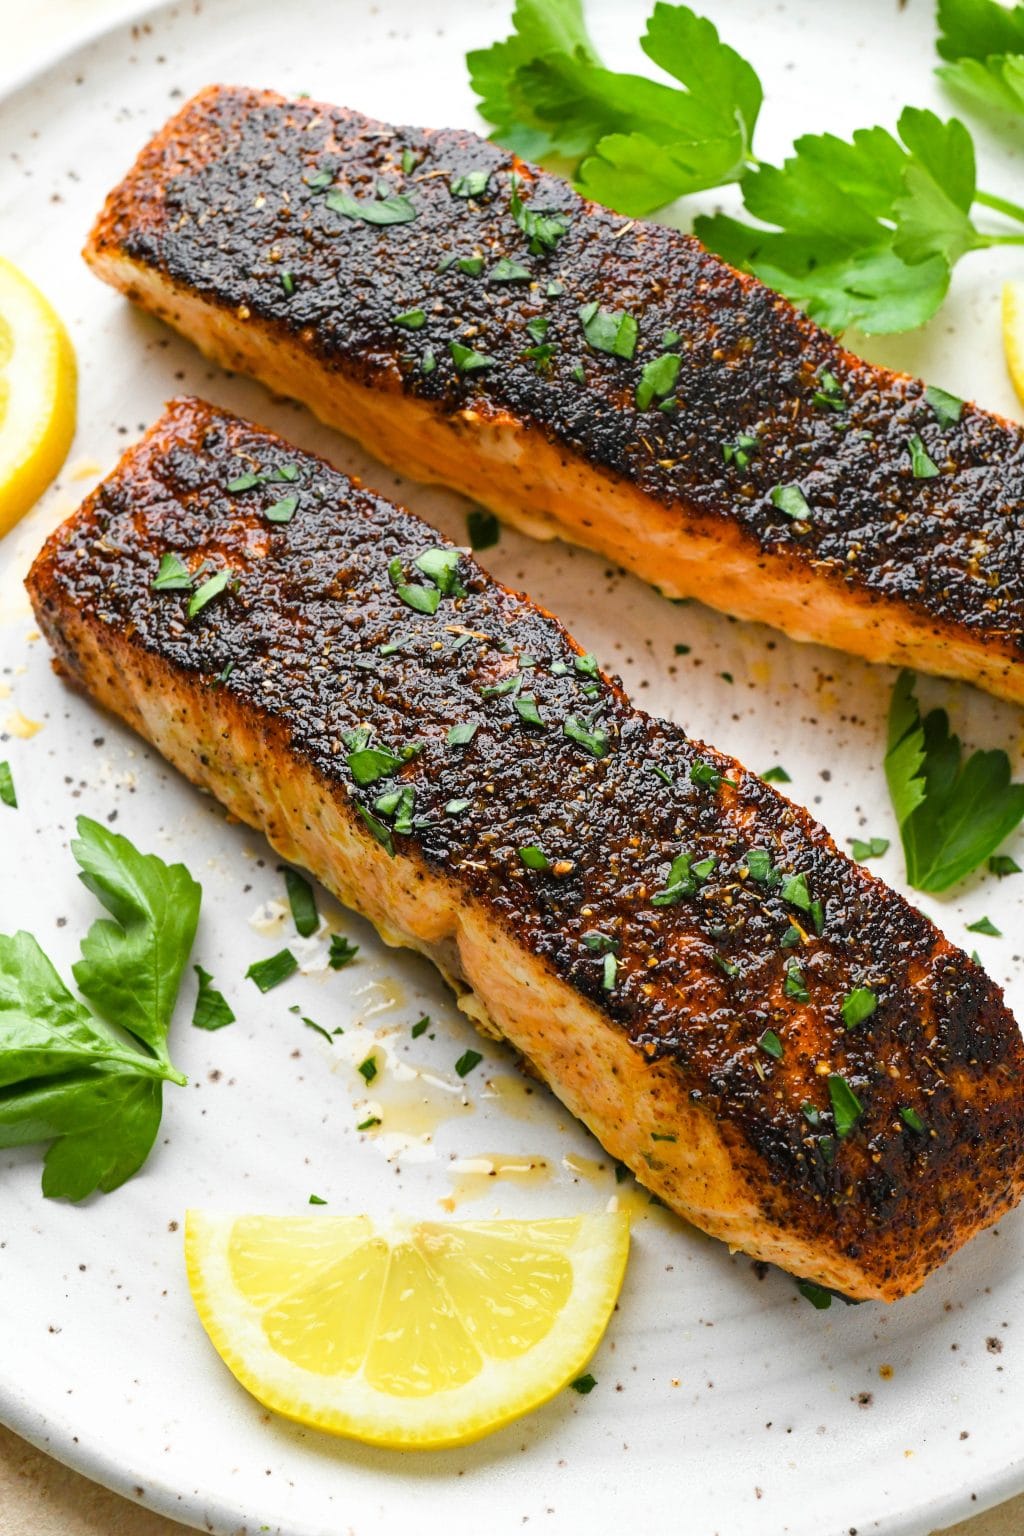 Seared Blackened Salmon for Two